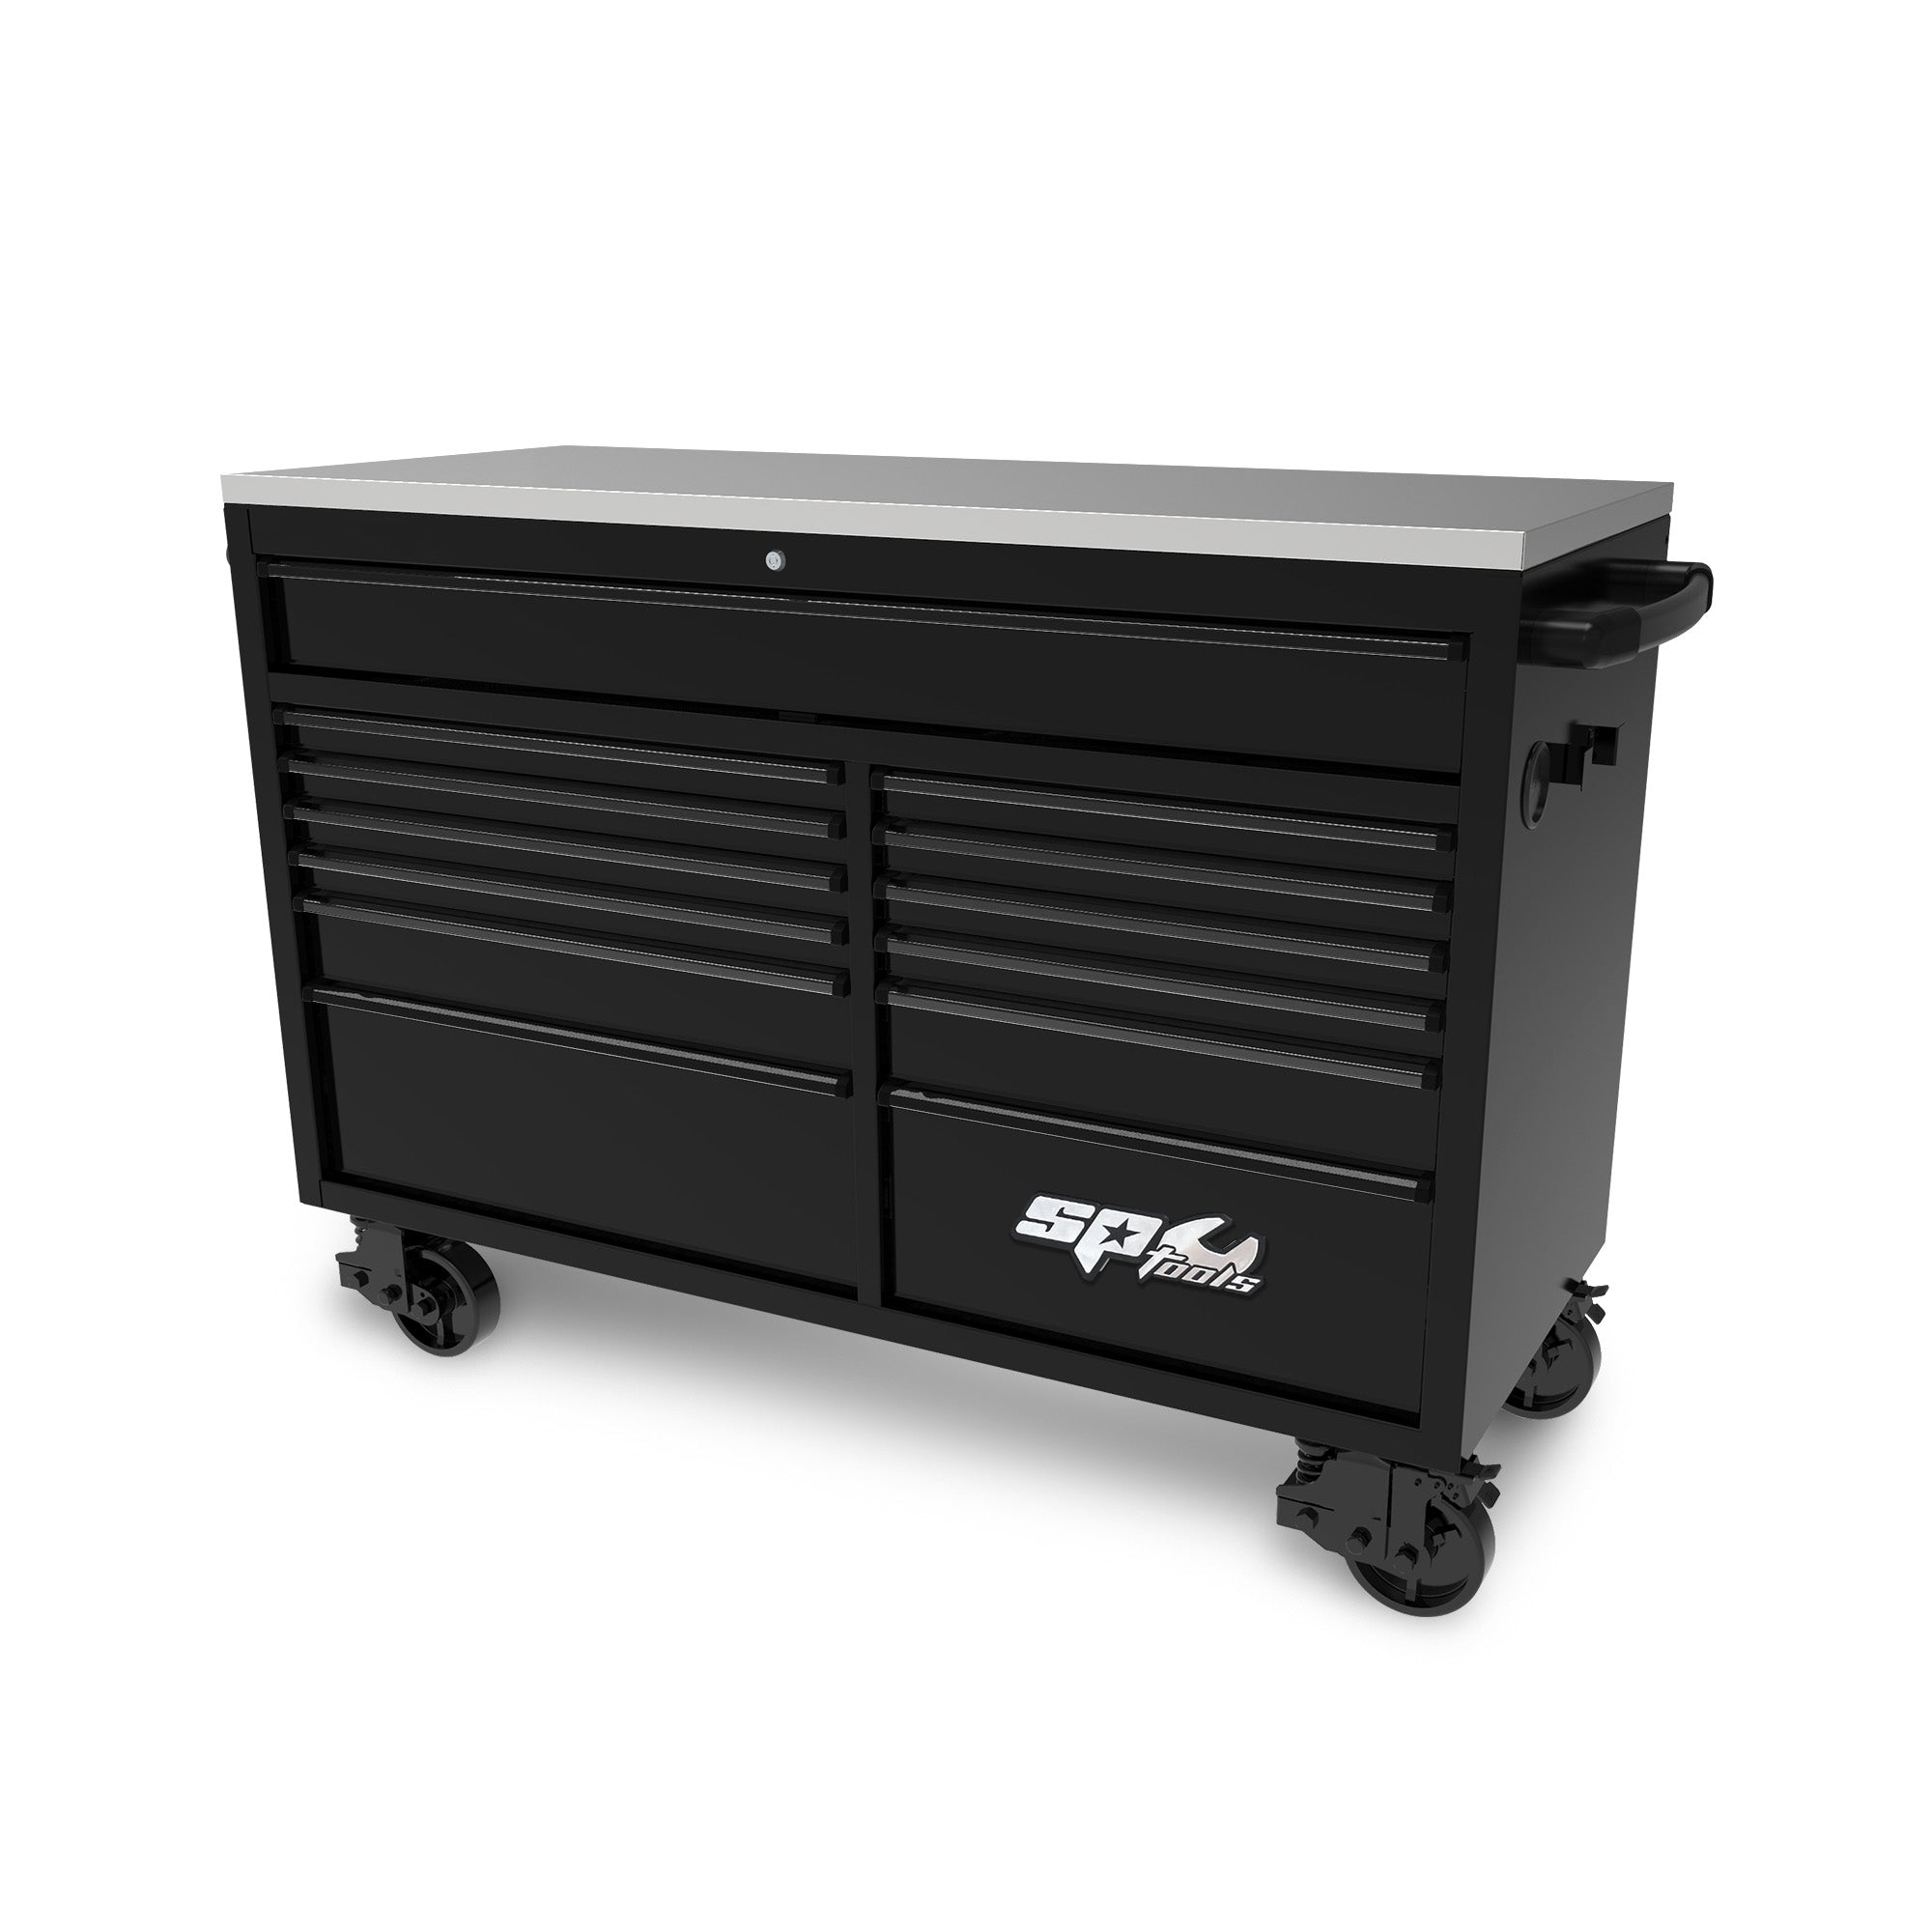 59" 13 Drawer Double Bank Toolbox Matte Black w/ Red Trim